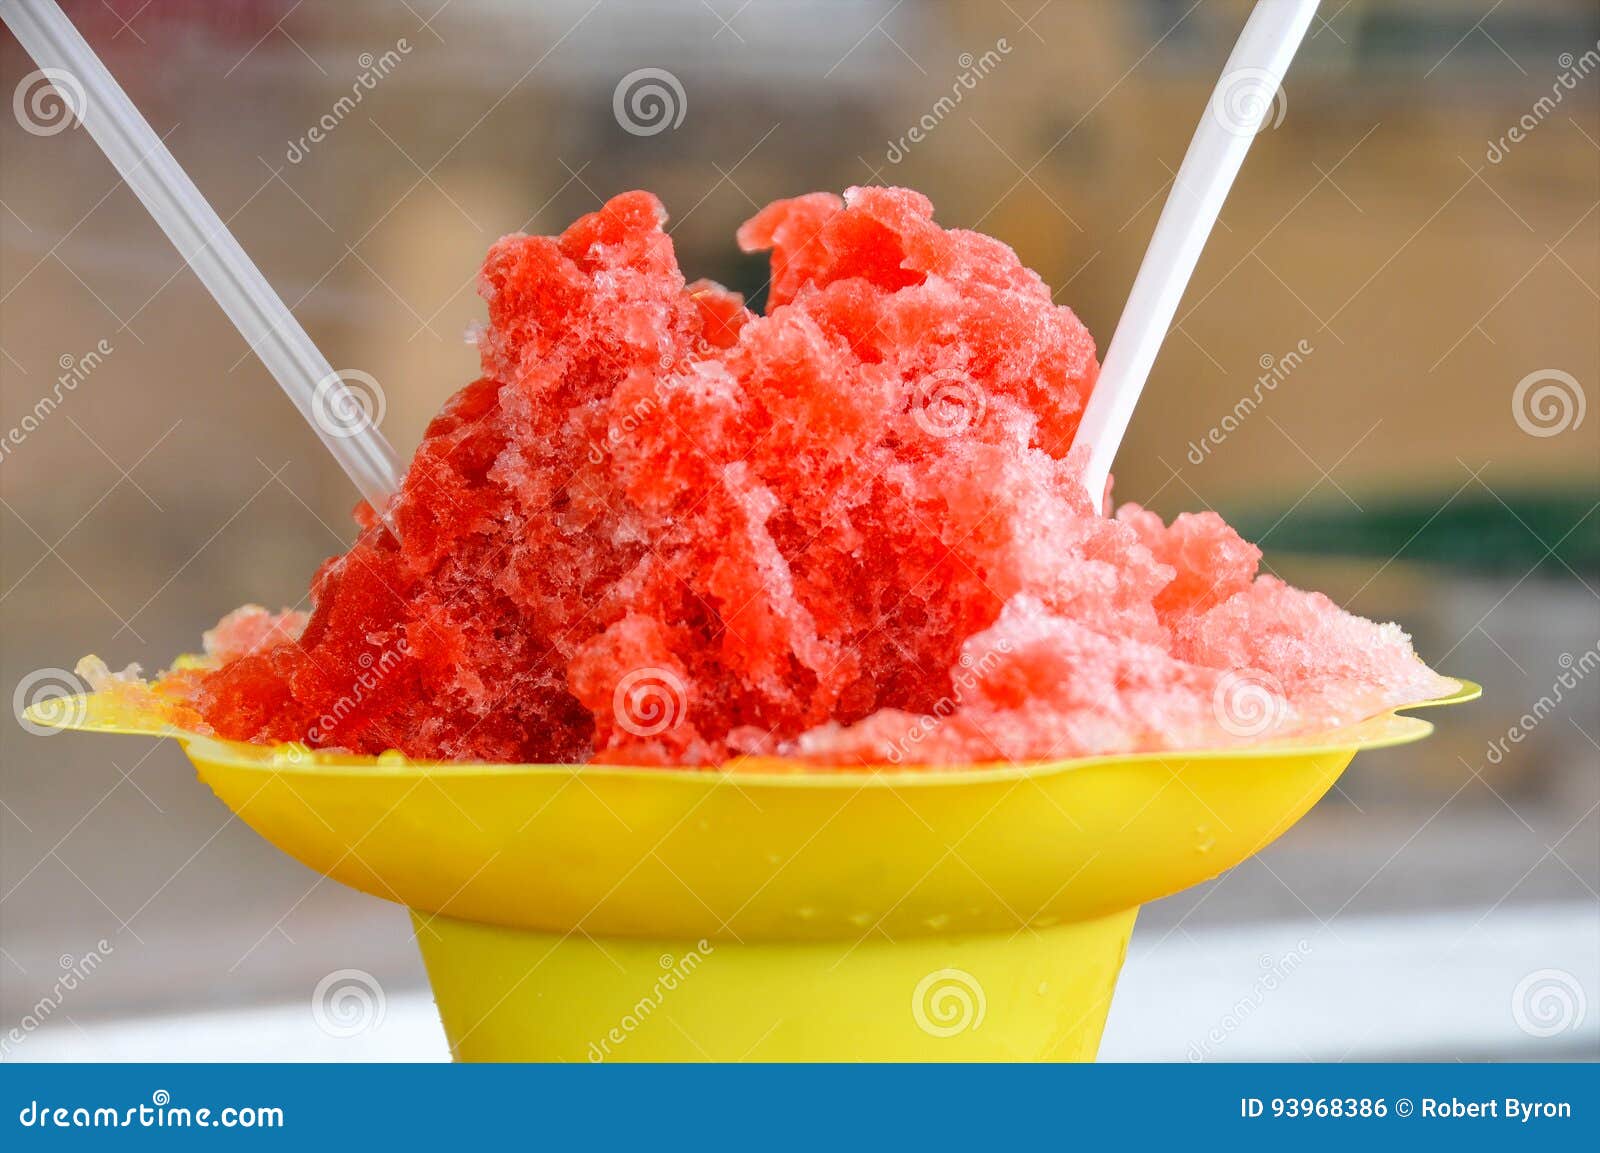 shaved ice snow cone